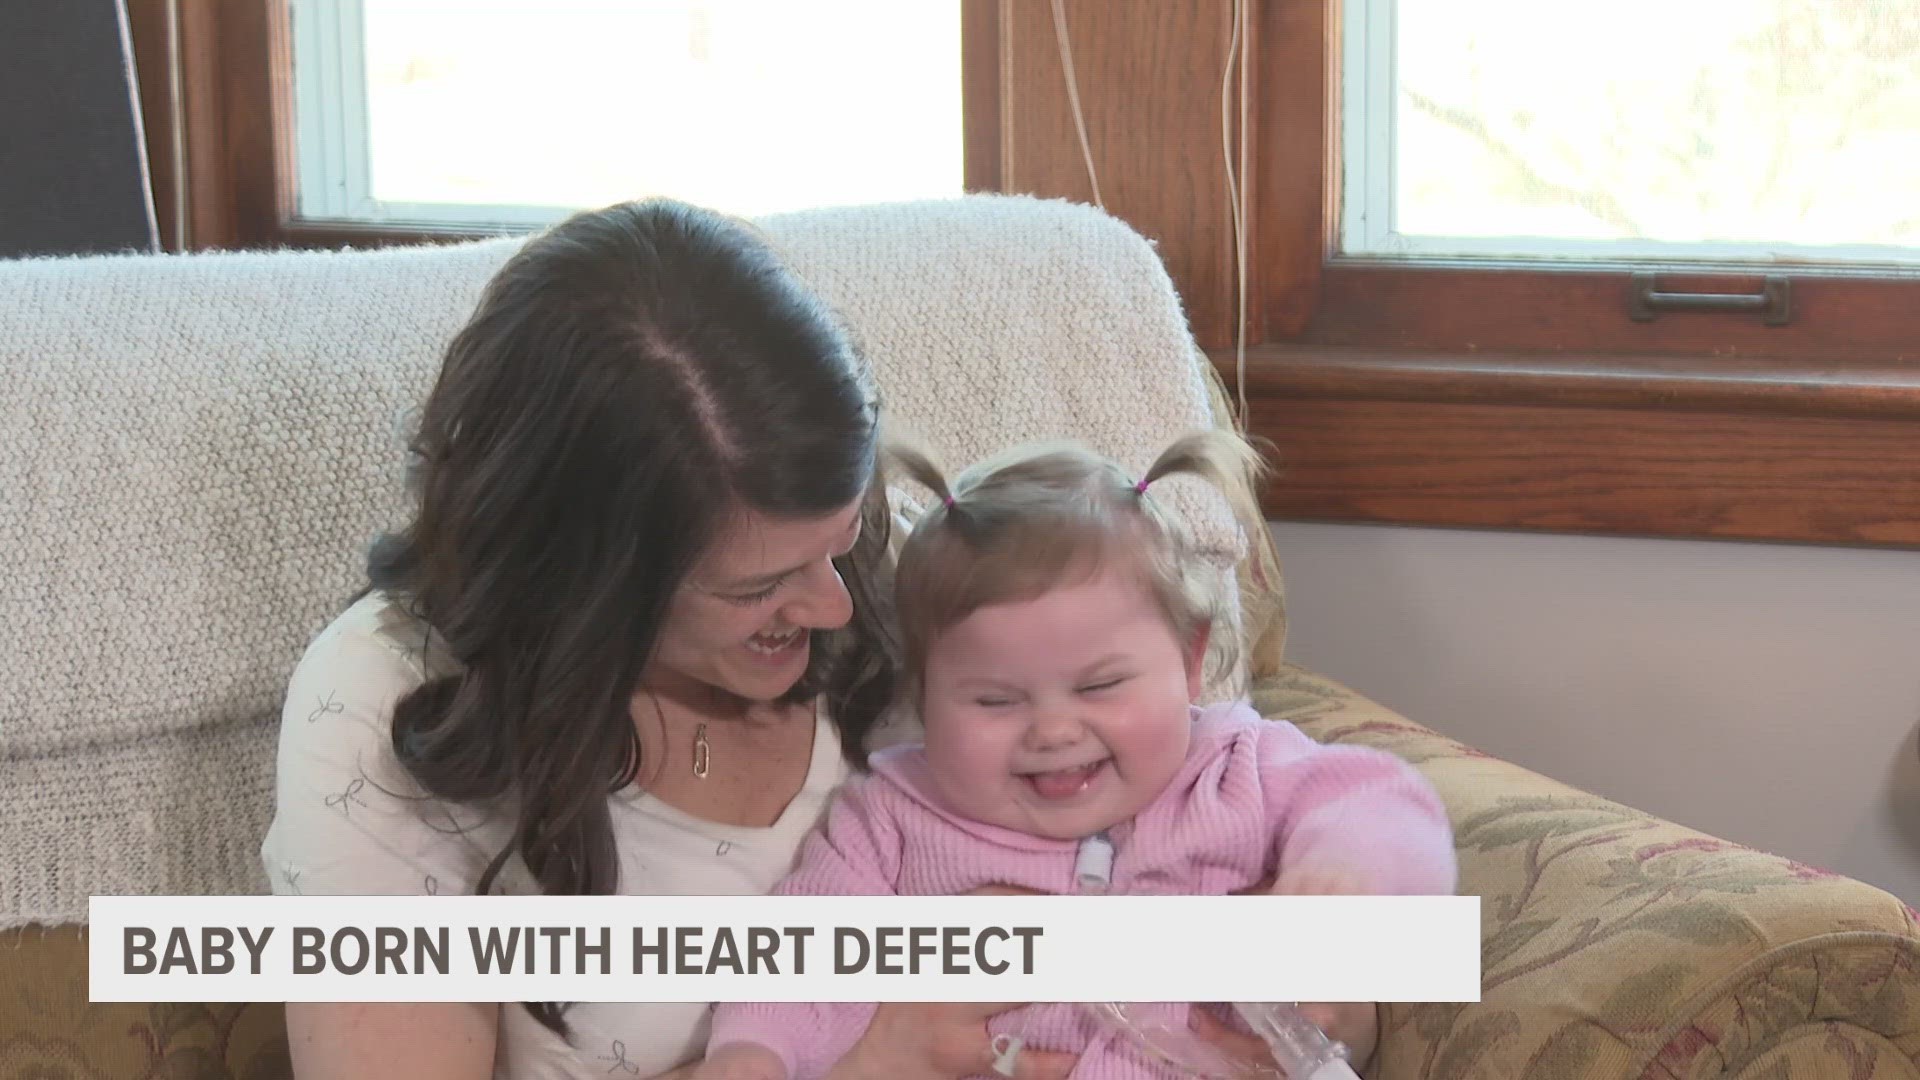 Ellie Koch was born with an undiagnosed heart defect. She had a stroke at two days old, and heart surgery two weeks later. Now, she's making strides.